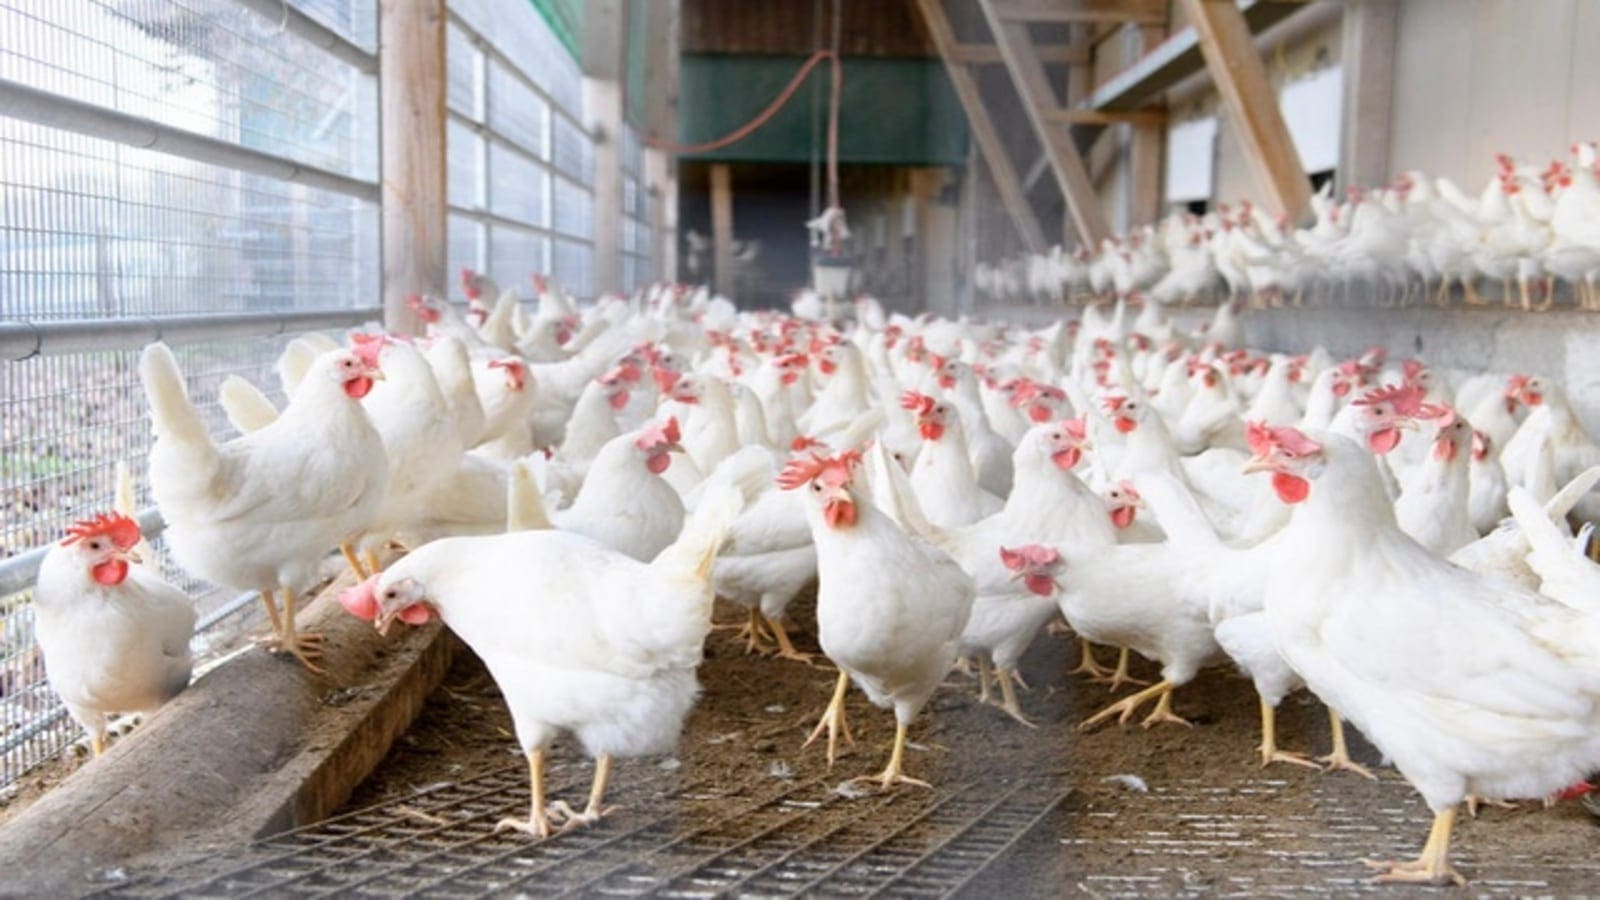 Canada to invest US$550m in country’s poultry industry to drive efficiency, sustainability